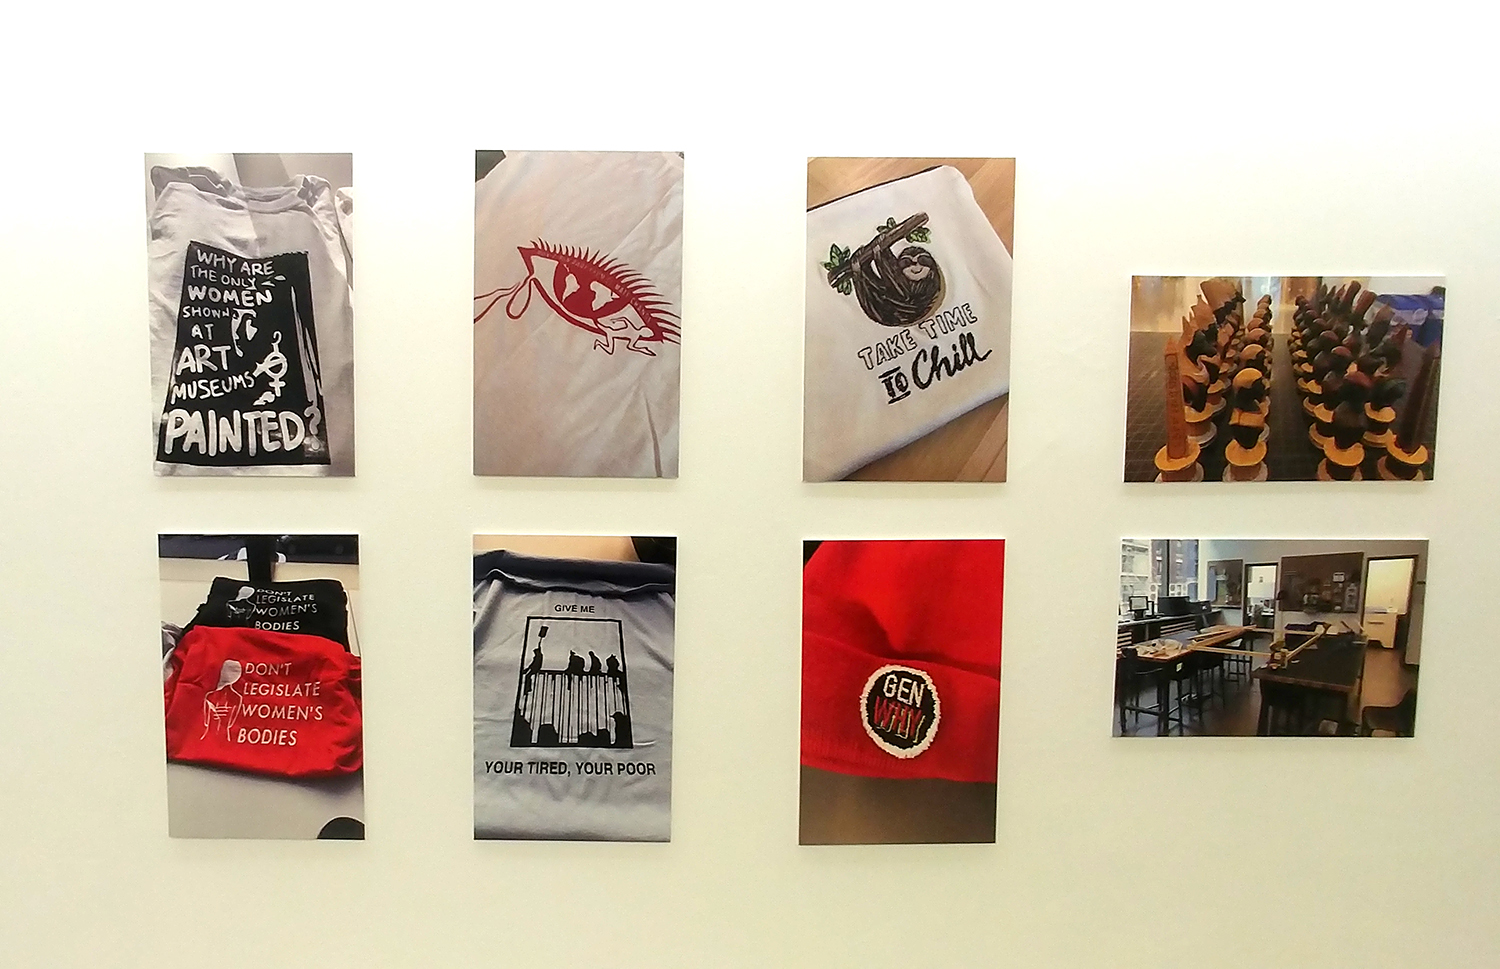 Photos of silk screen and embroidery projects hung up on the wall.